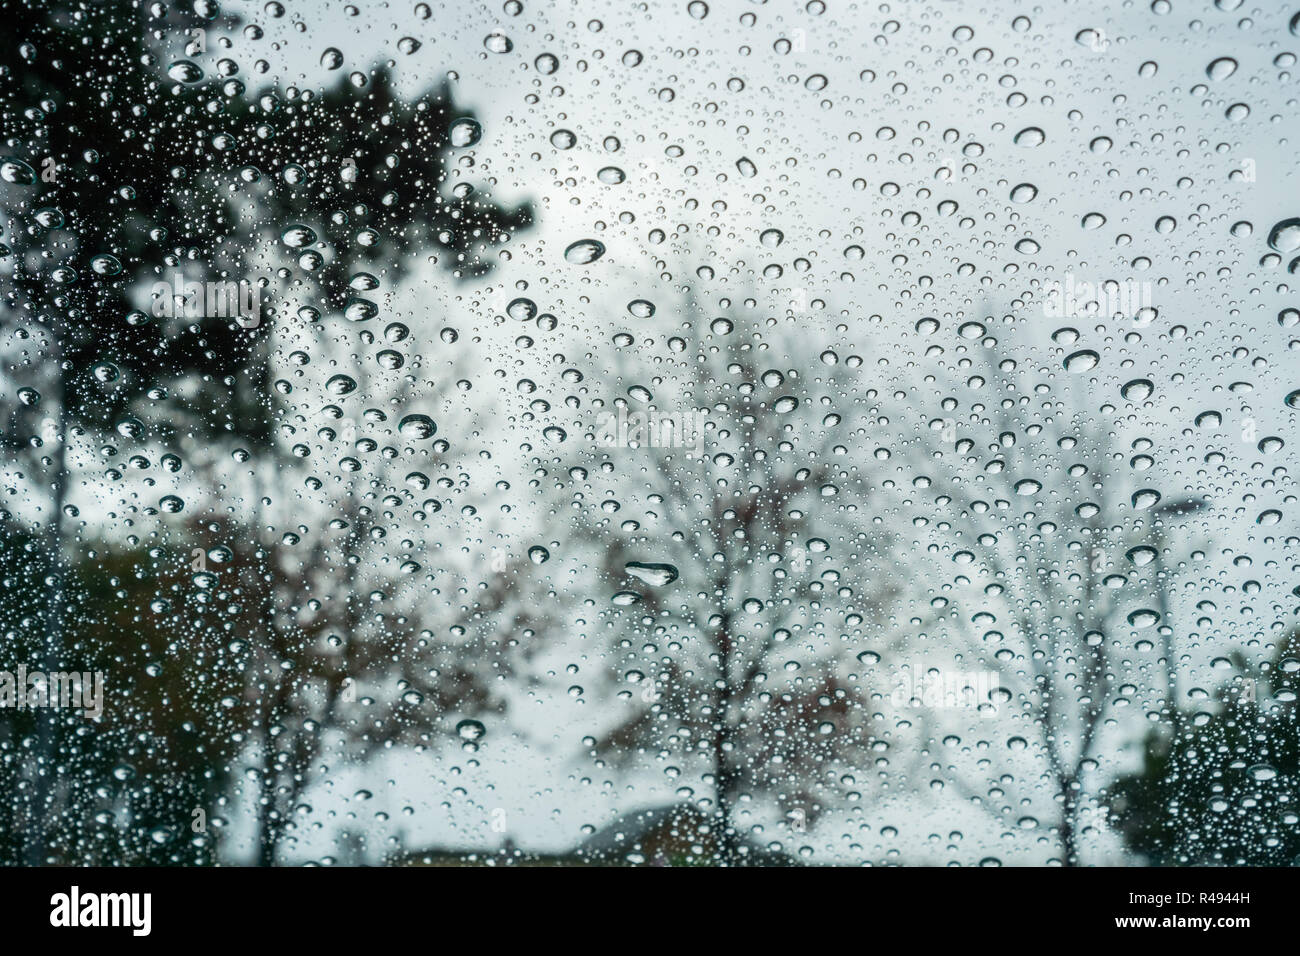 Drops of rain on the window; blurred trees in the background Stock Photo